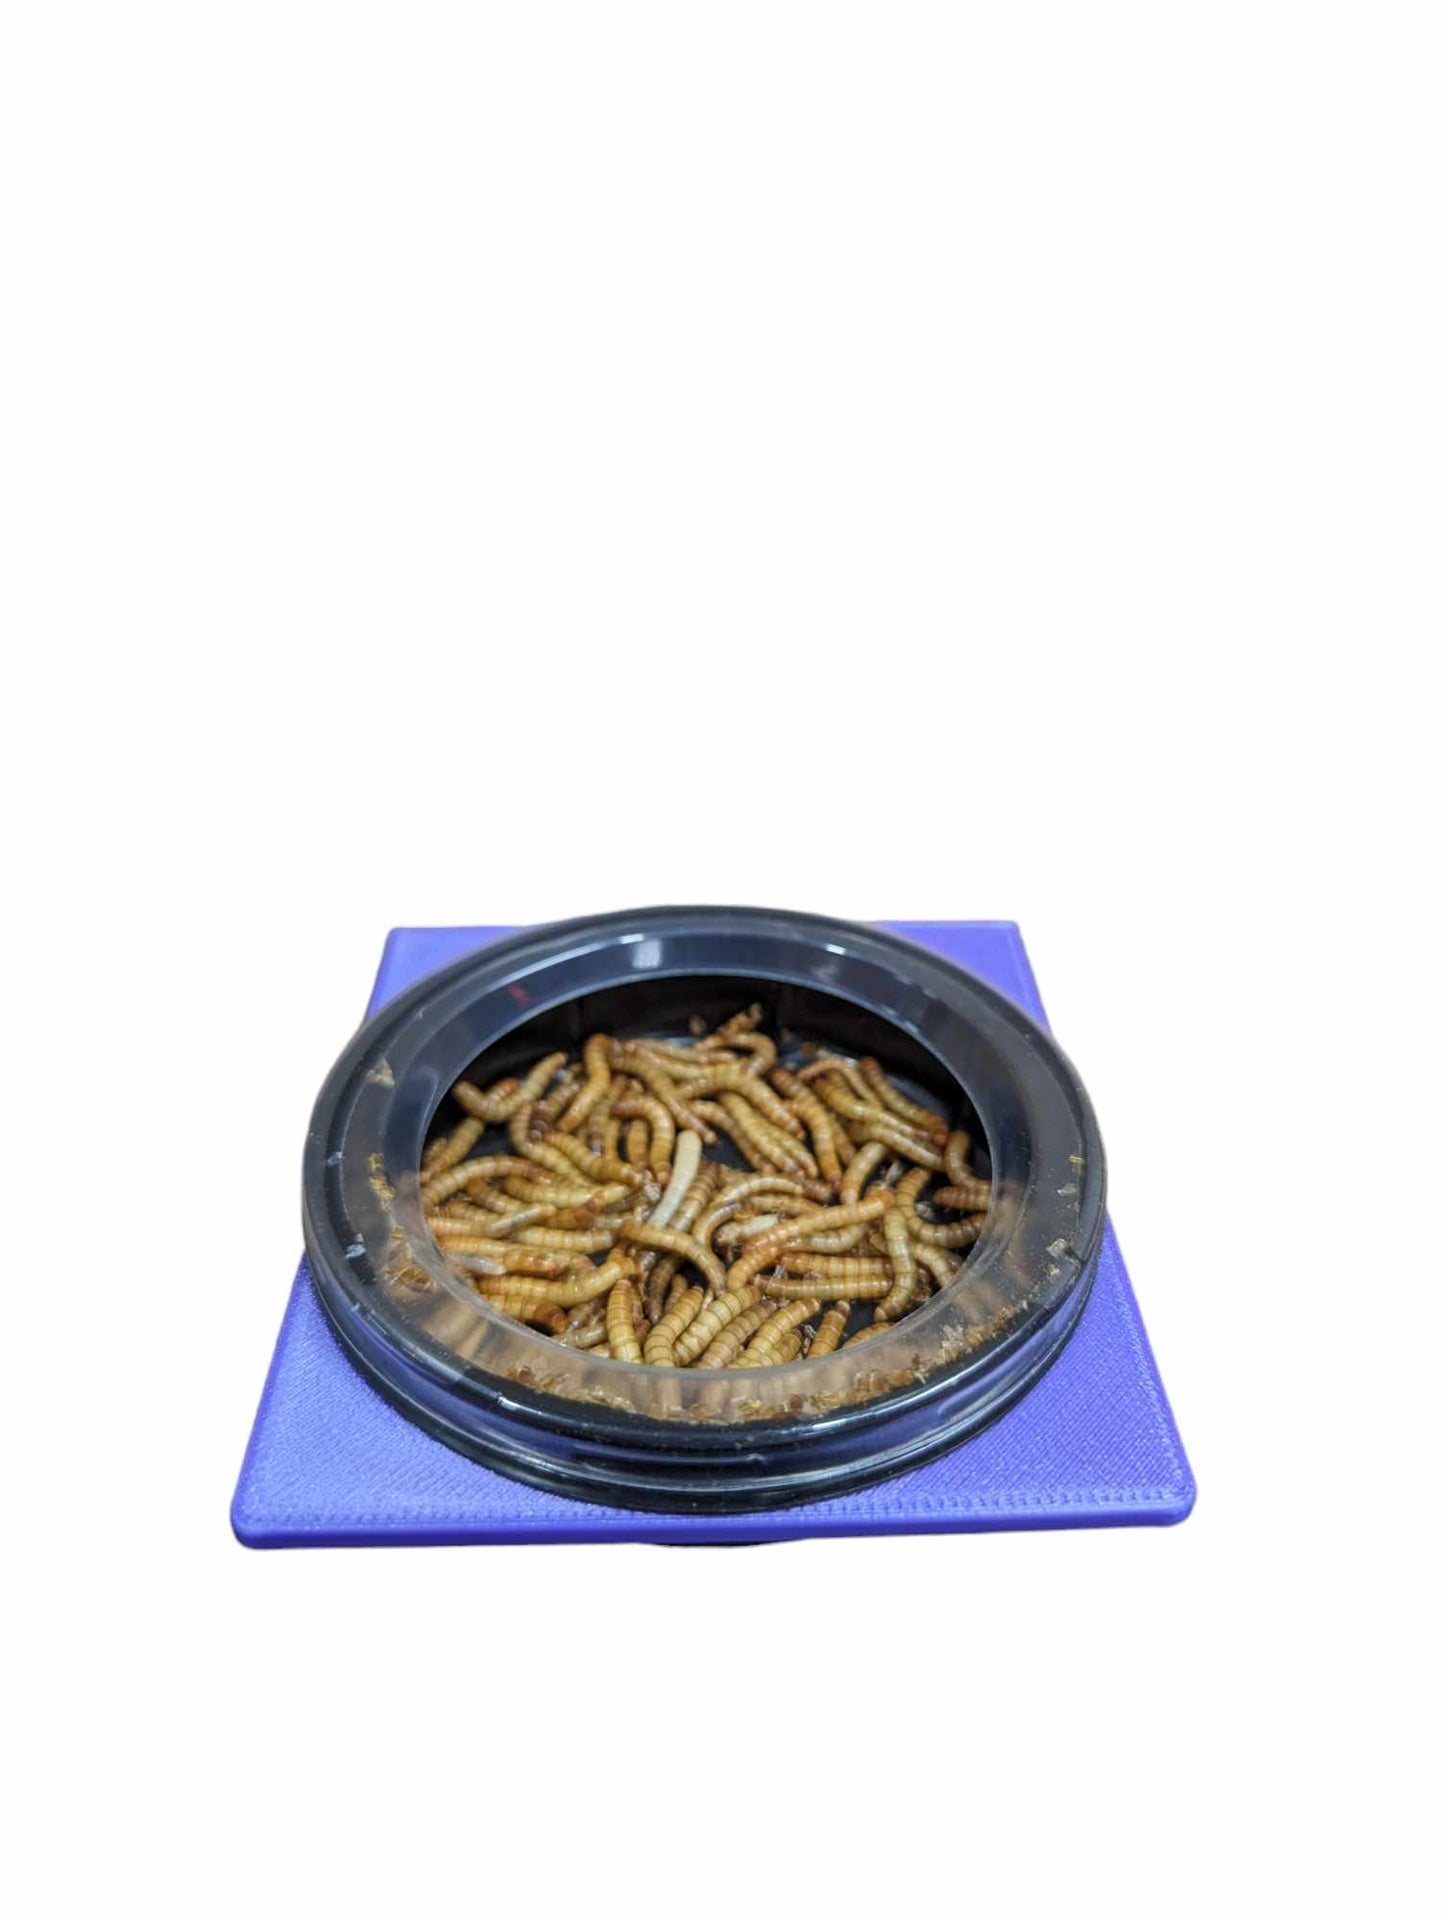 Meal Worm Plastic Food Dishes